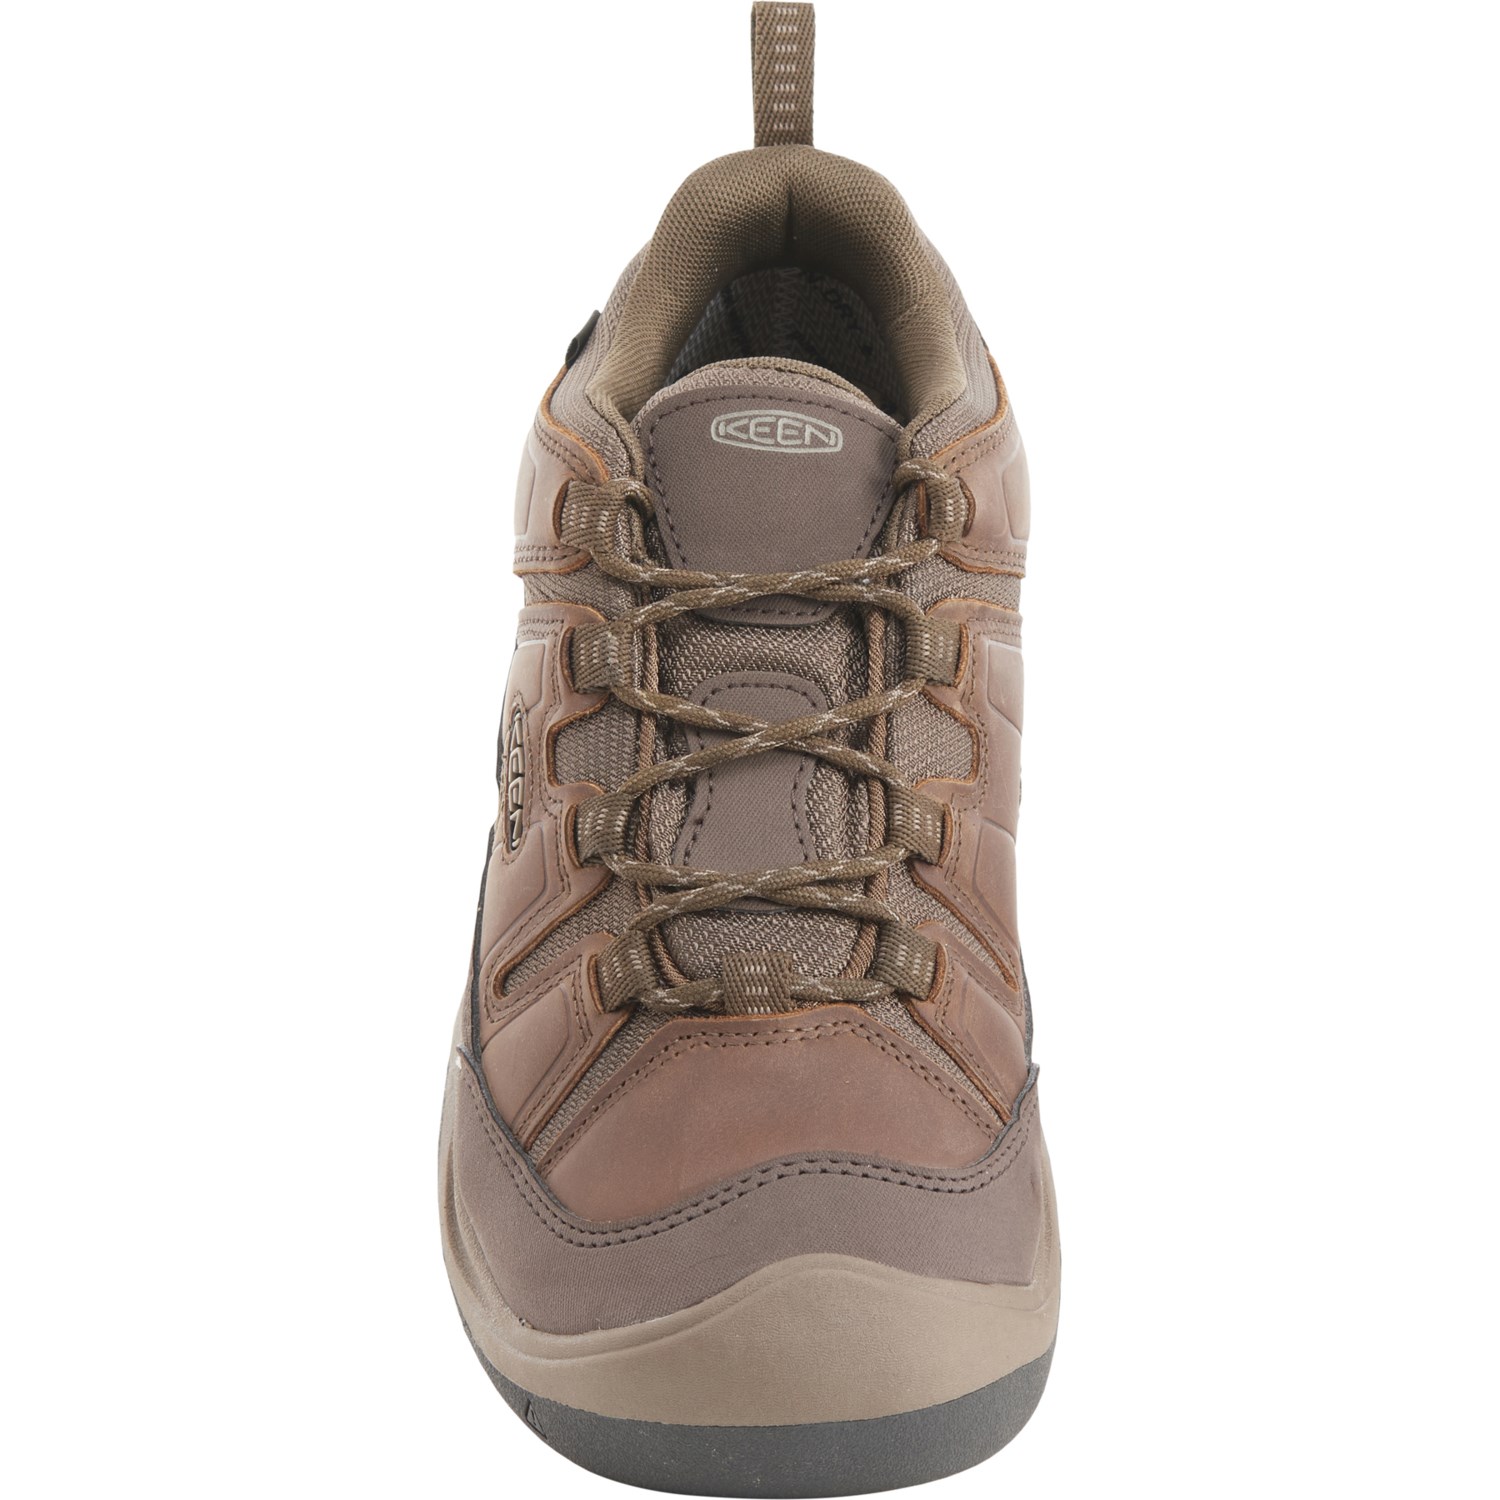 Keen Circadia Hiking Shoes (For Men) - Save 40%